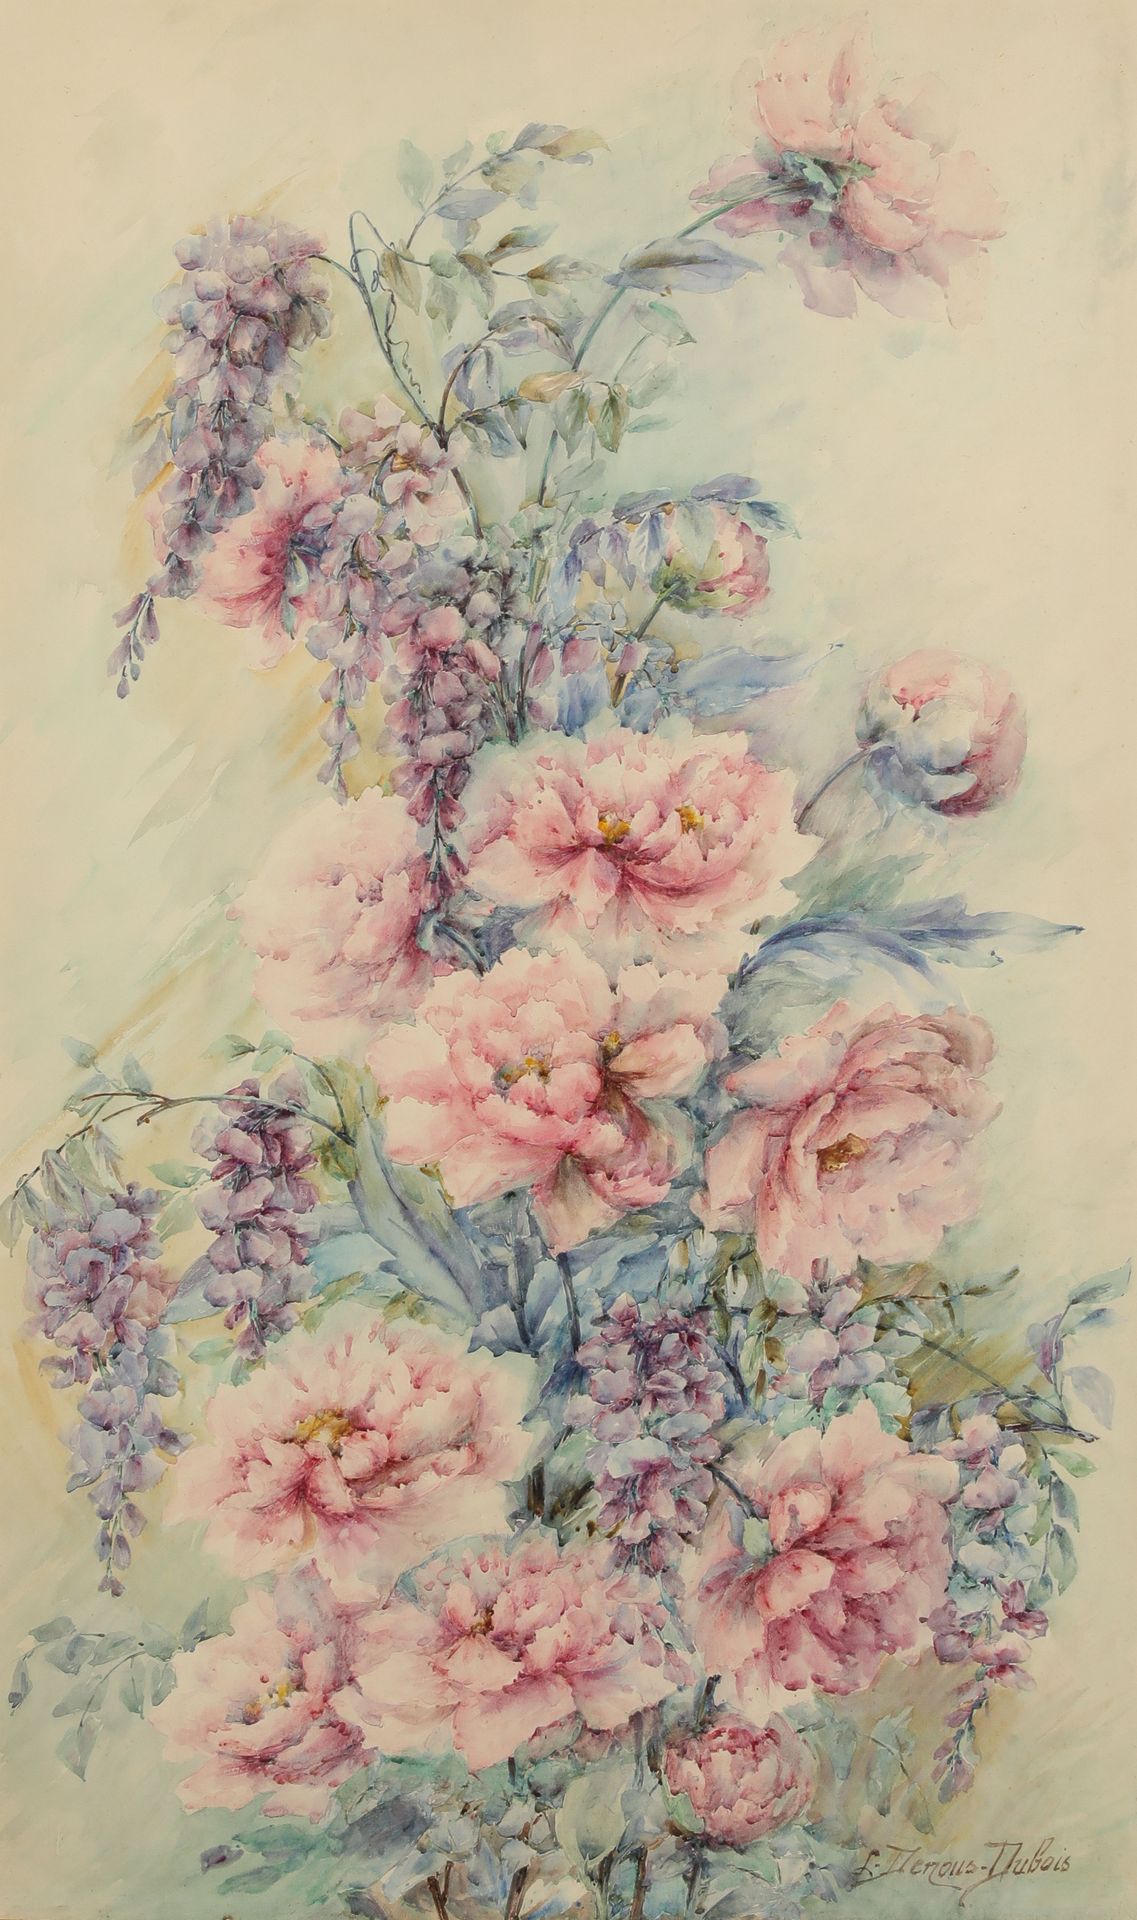 Null Louise DENOUS DUBOIS (20th century)
Glycines and peonies
Watercolor on pape&hellip;